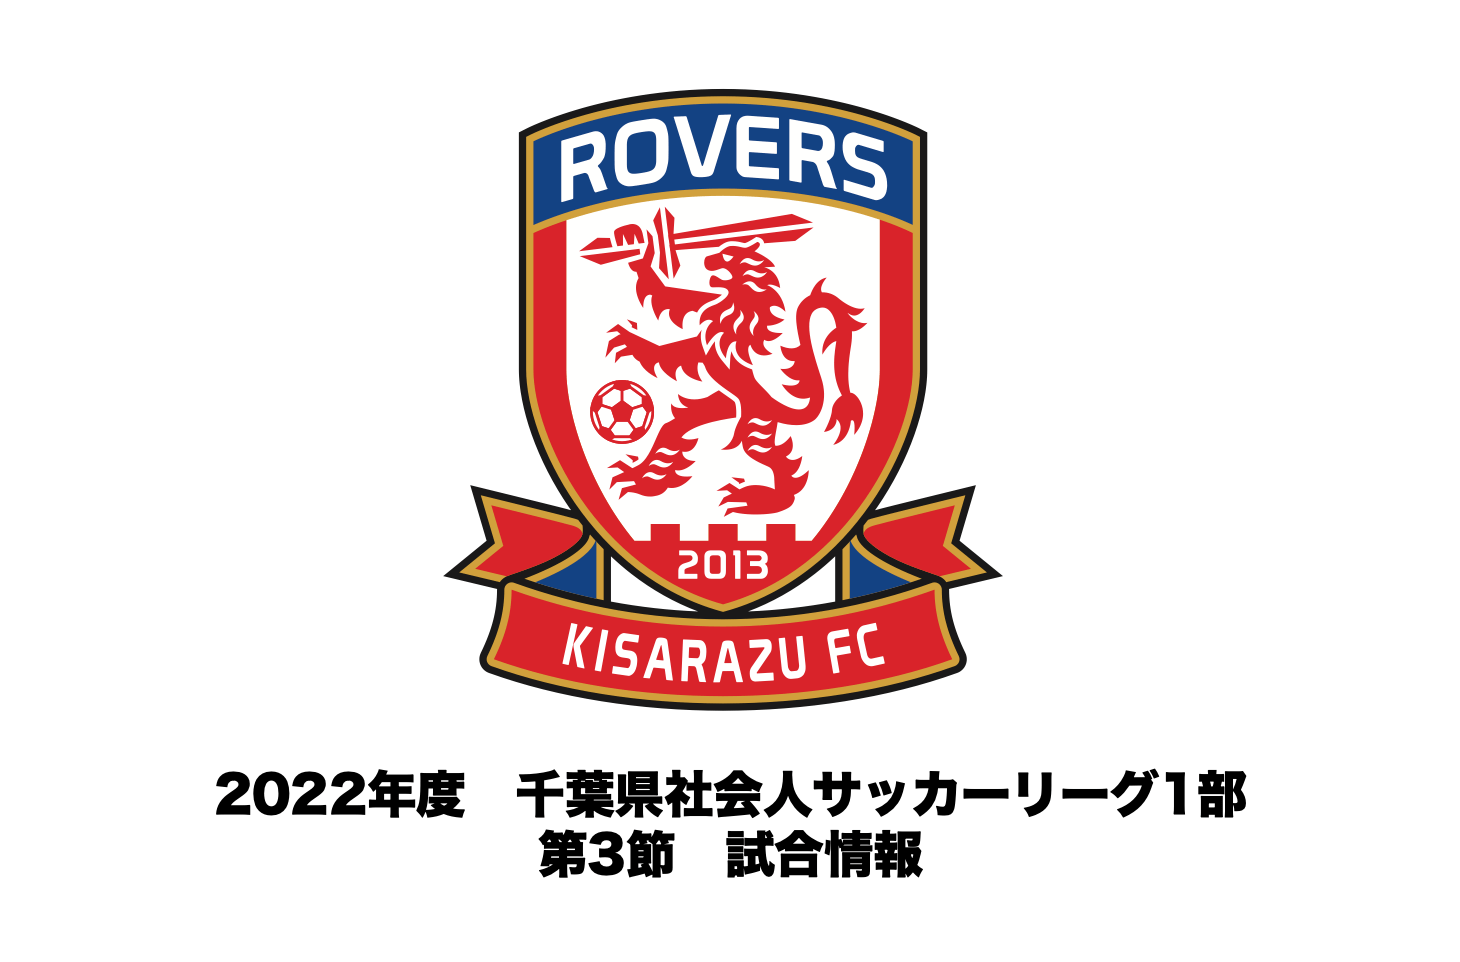 Read more about the article ☆有観客開催☆【試合情報】2022年度 千葉県社会人サッカーリーグ1部 第3節について